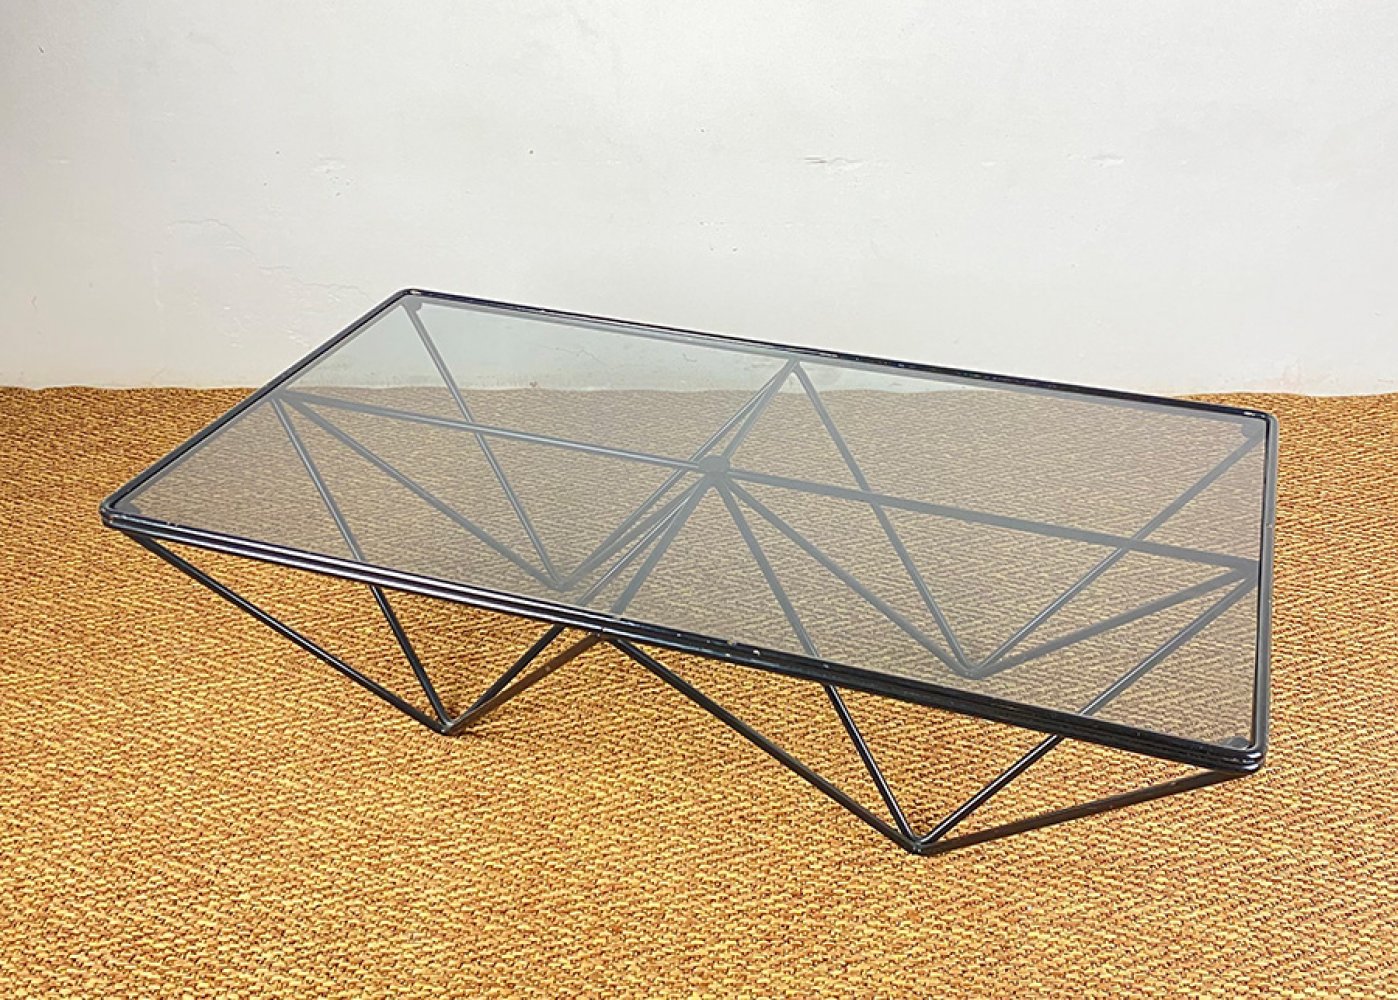 Contributed to PAOLO PIVA, (Adria, Italy, 1950 - Vienna, 2017).Coffee table "Alanda", 1970s.Producer - Image 2 of 7